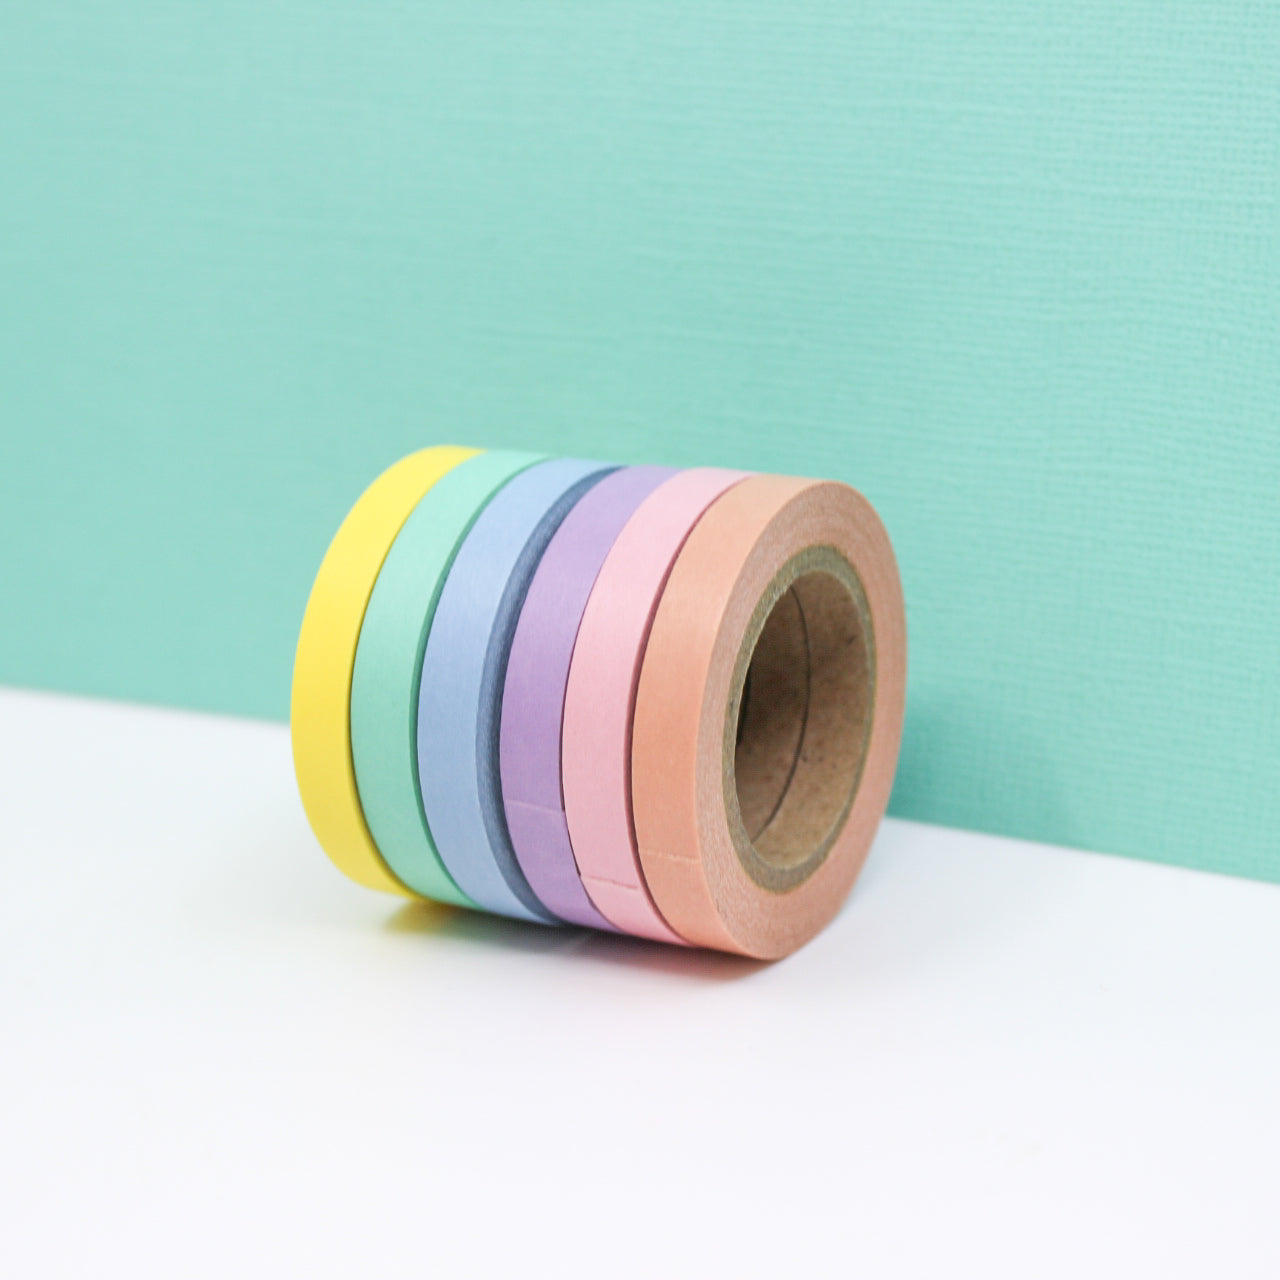 Add a gentle touch to your crafts with our Pastel Color Narrow Solid Washi Tape Set. This set includes a variety of narrow washi tapes in soft pastel hues, ideal for adding a delicate and soothing touch to your projects. This tape is sold at BBB Supplies Craft Shop.